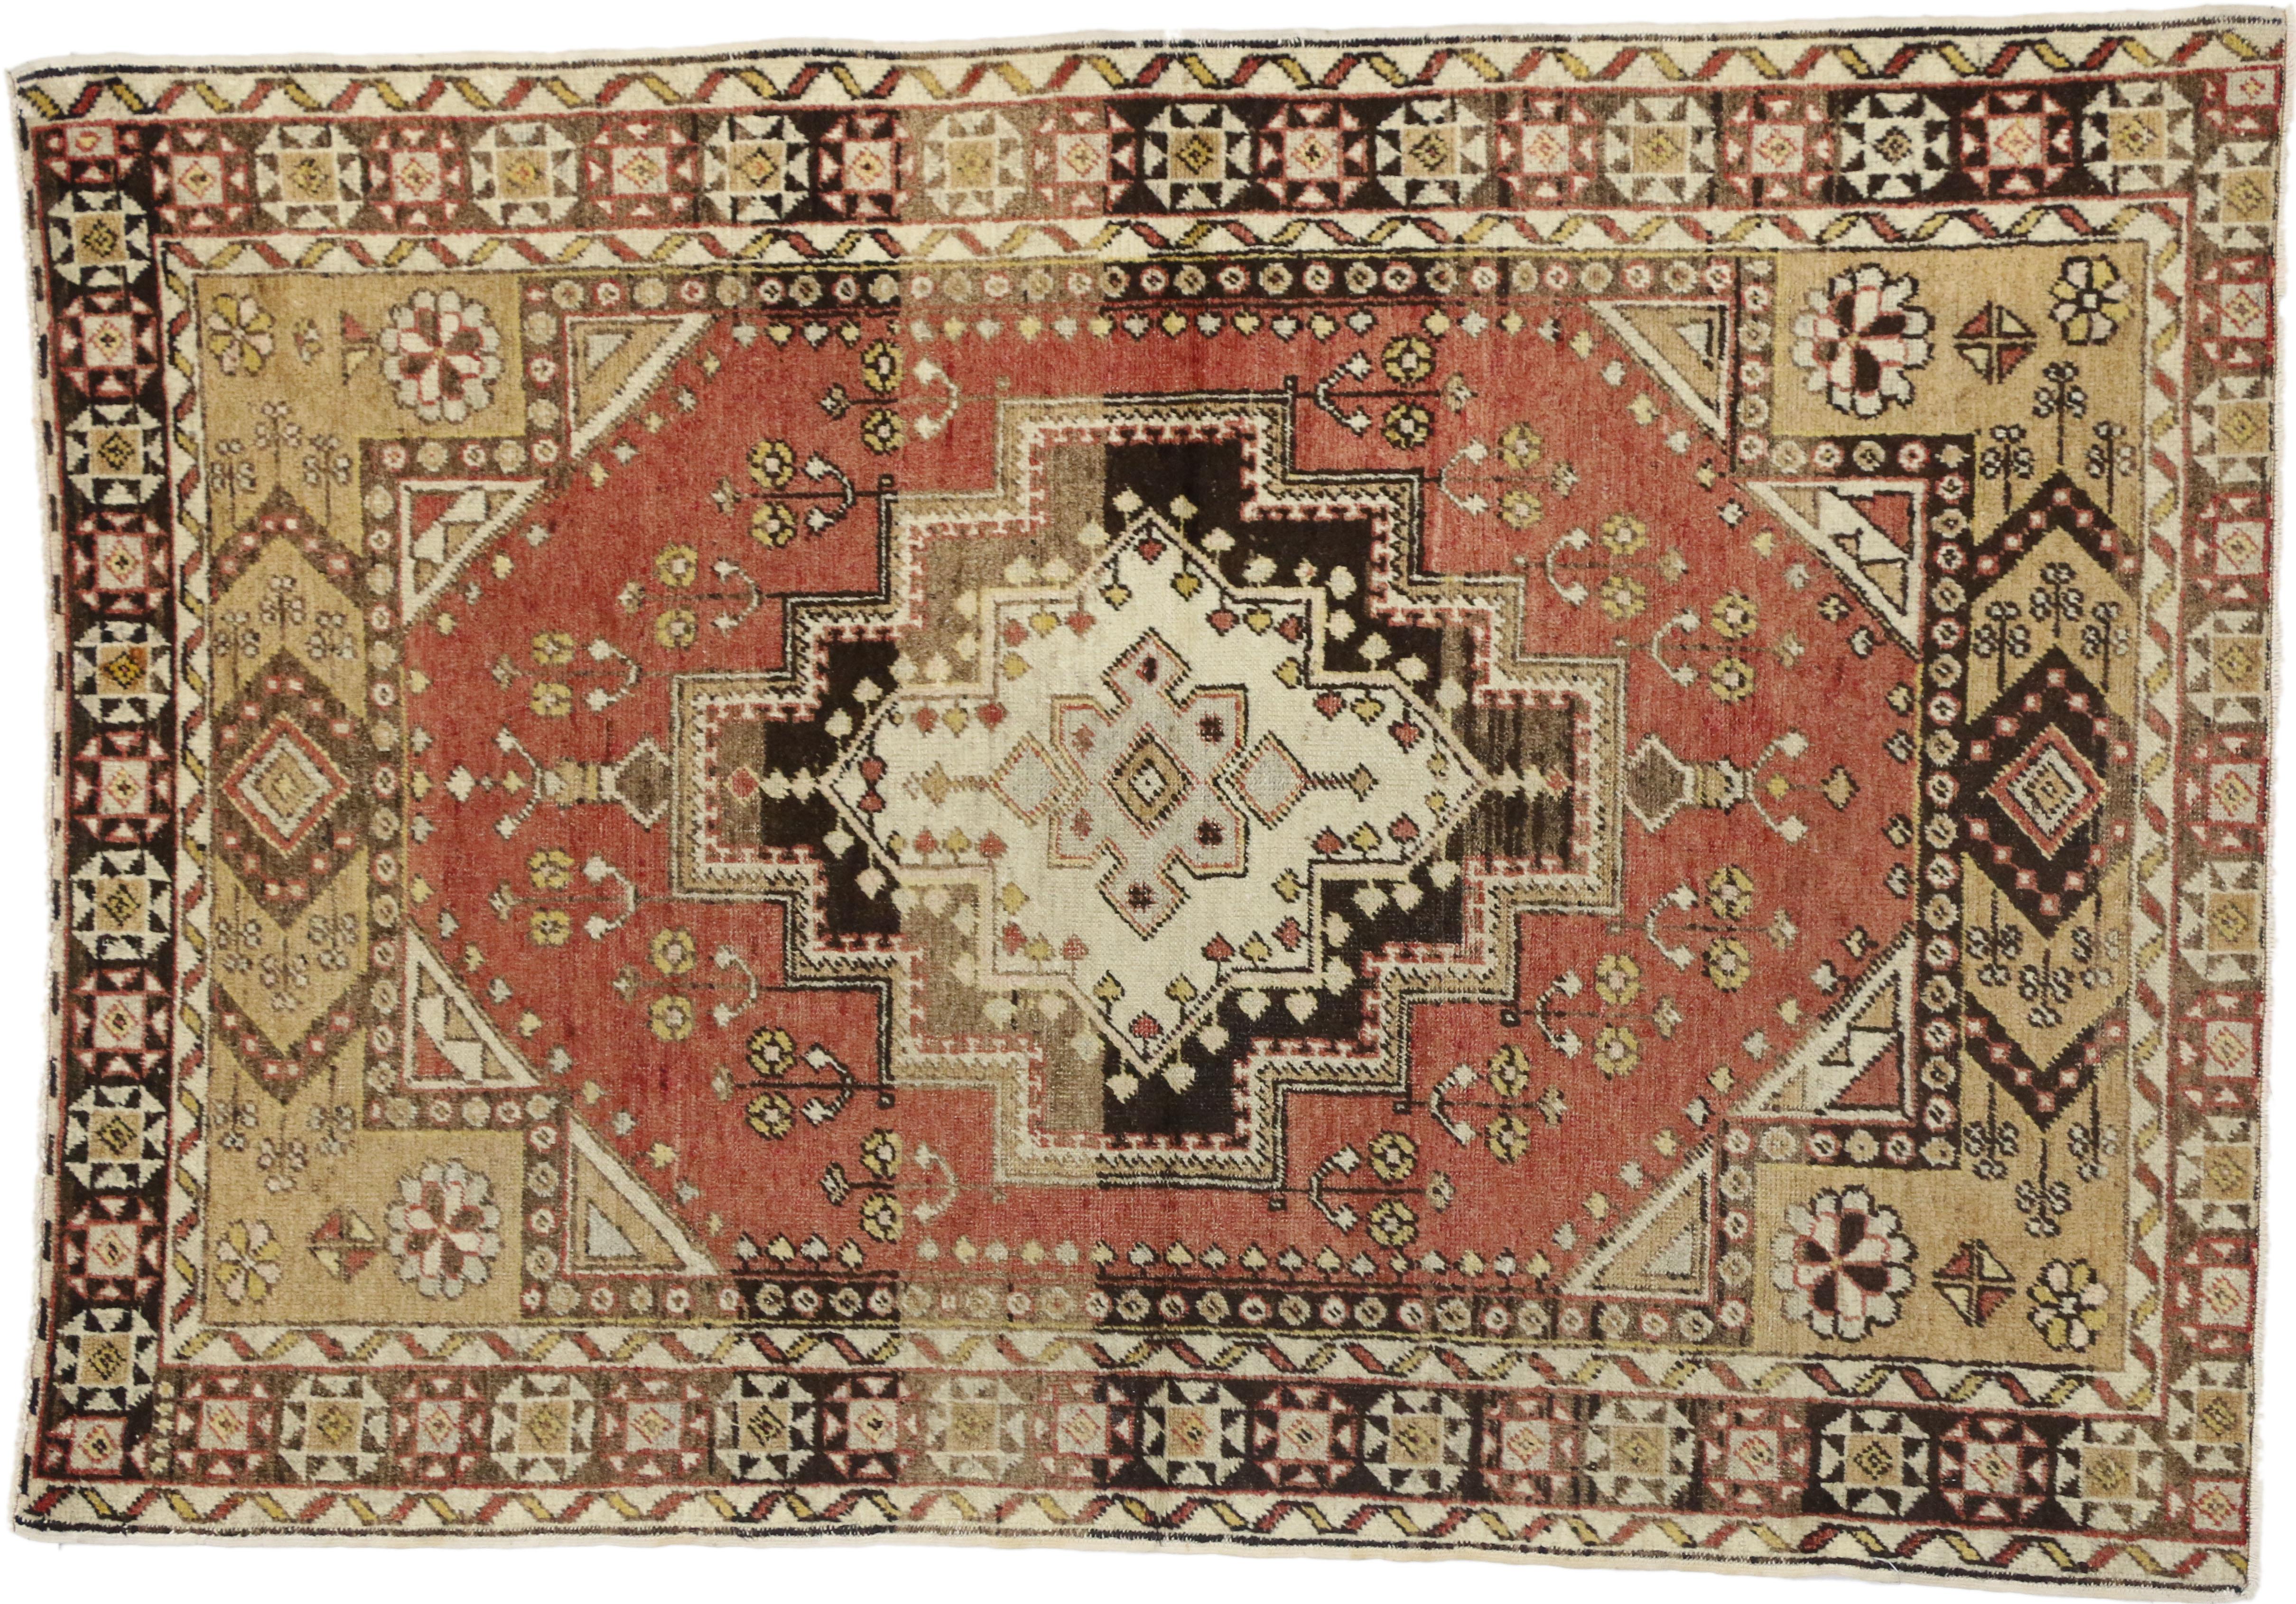 Rustic Lodge Style Vintage Turkish Oushak Accent Rug, Entry or Foyer Rug In Good Condition For Sale In Dallas, TX